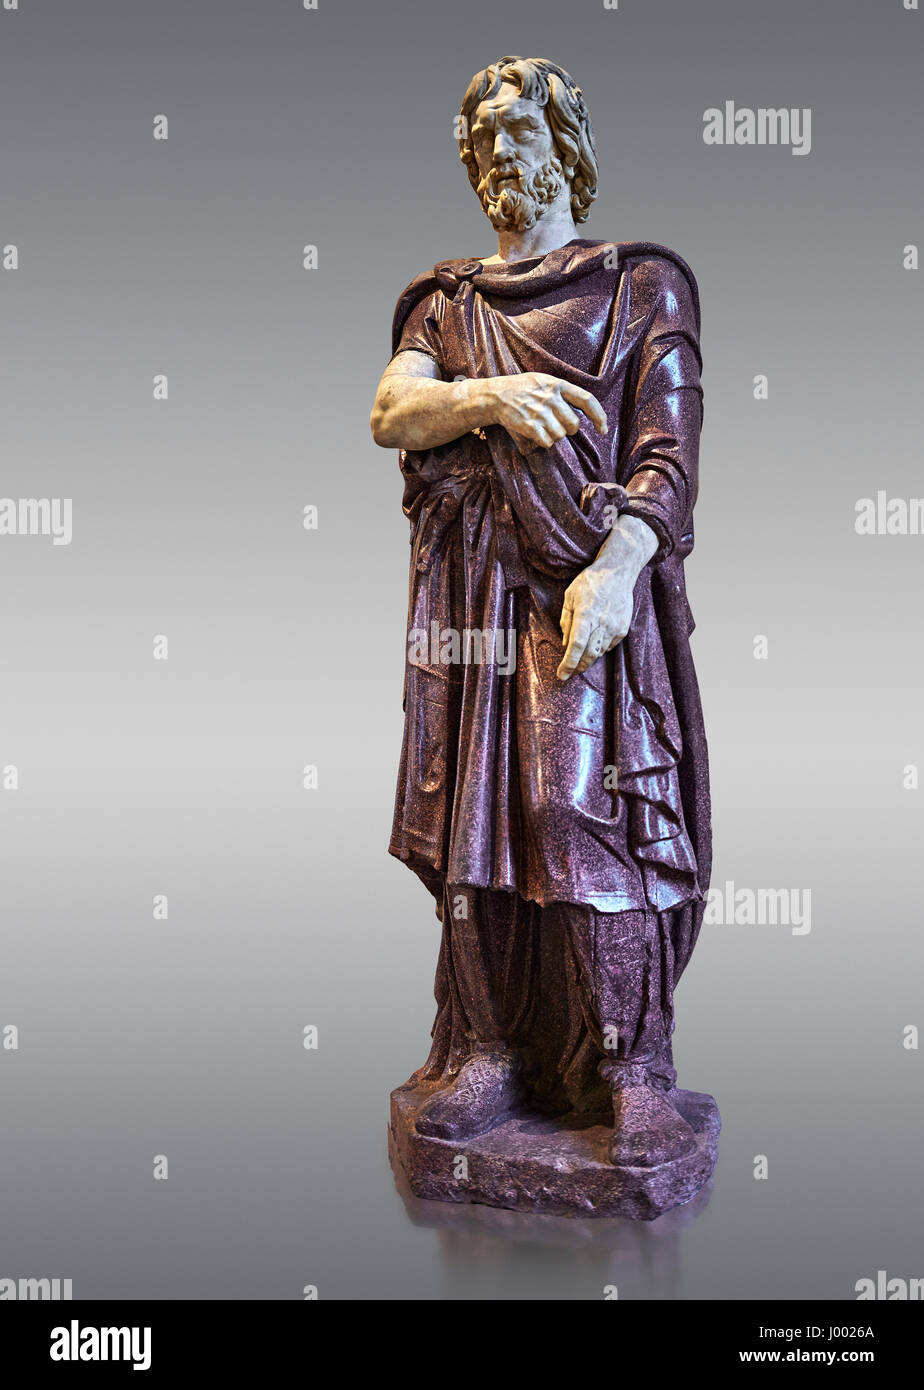 Statue of a Captive Barbarian - 2nd century Ad Roman sculpture made in Porphyry. Inv No. MR 331 or Ma 1385, Louvre Museum, Paris. Stock Photo